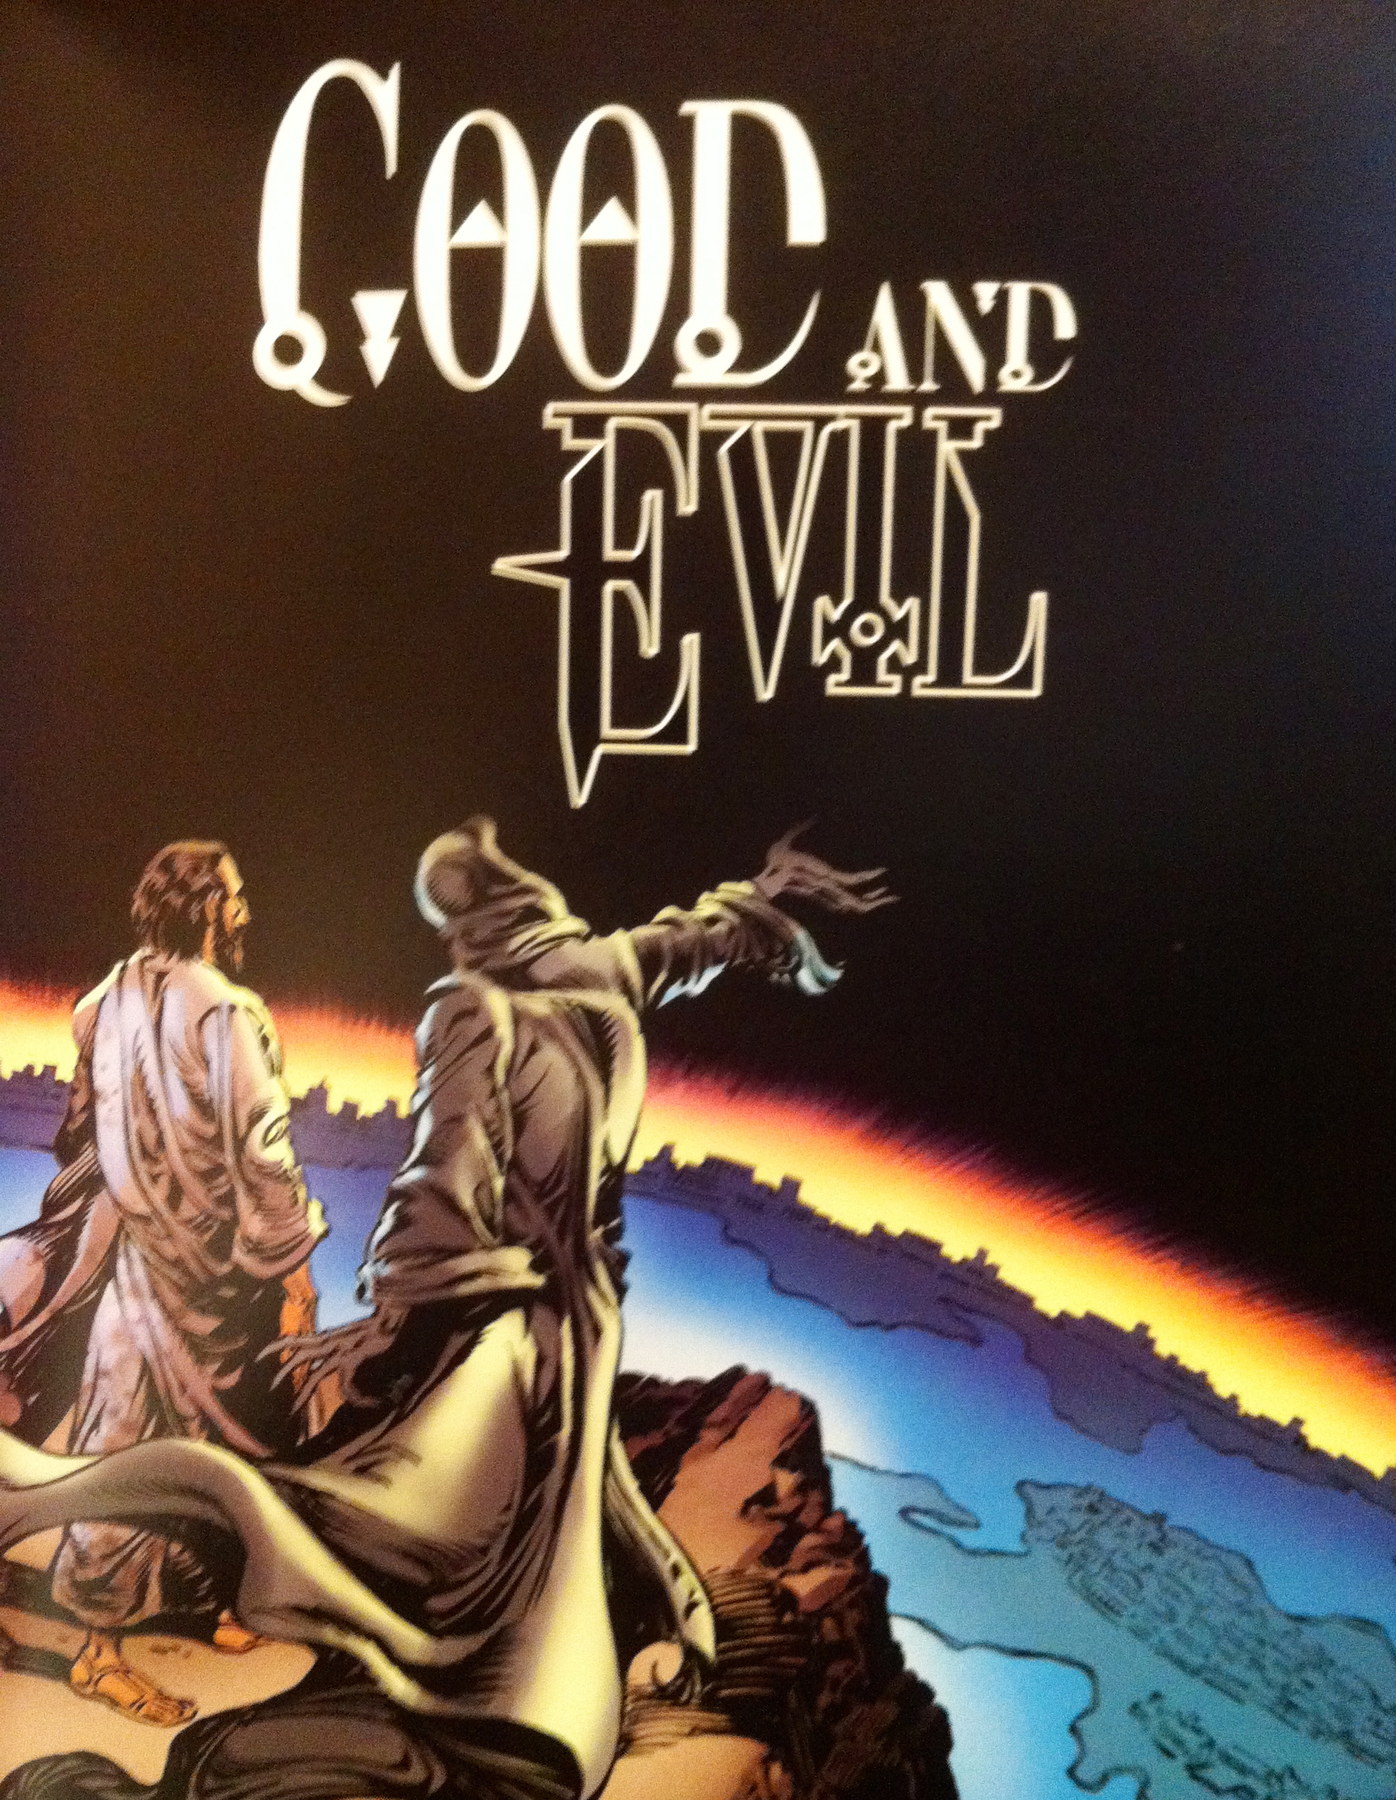 Graphic Novel + Bible Stories = Awesomeness!